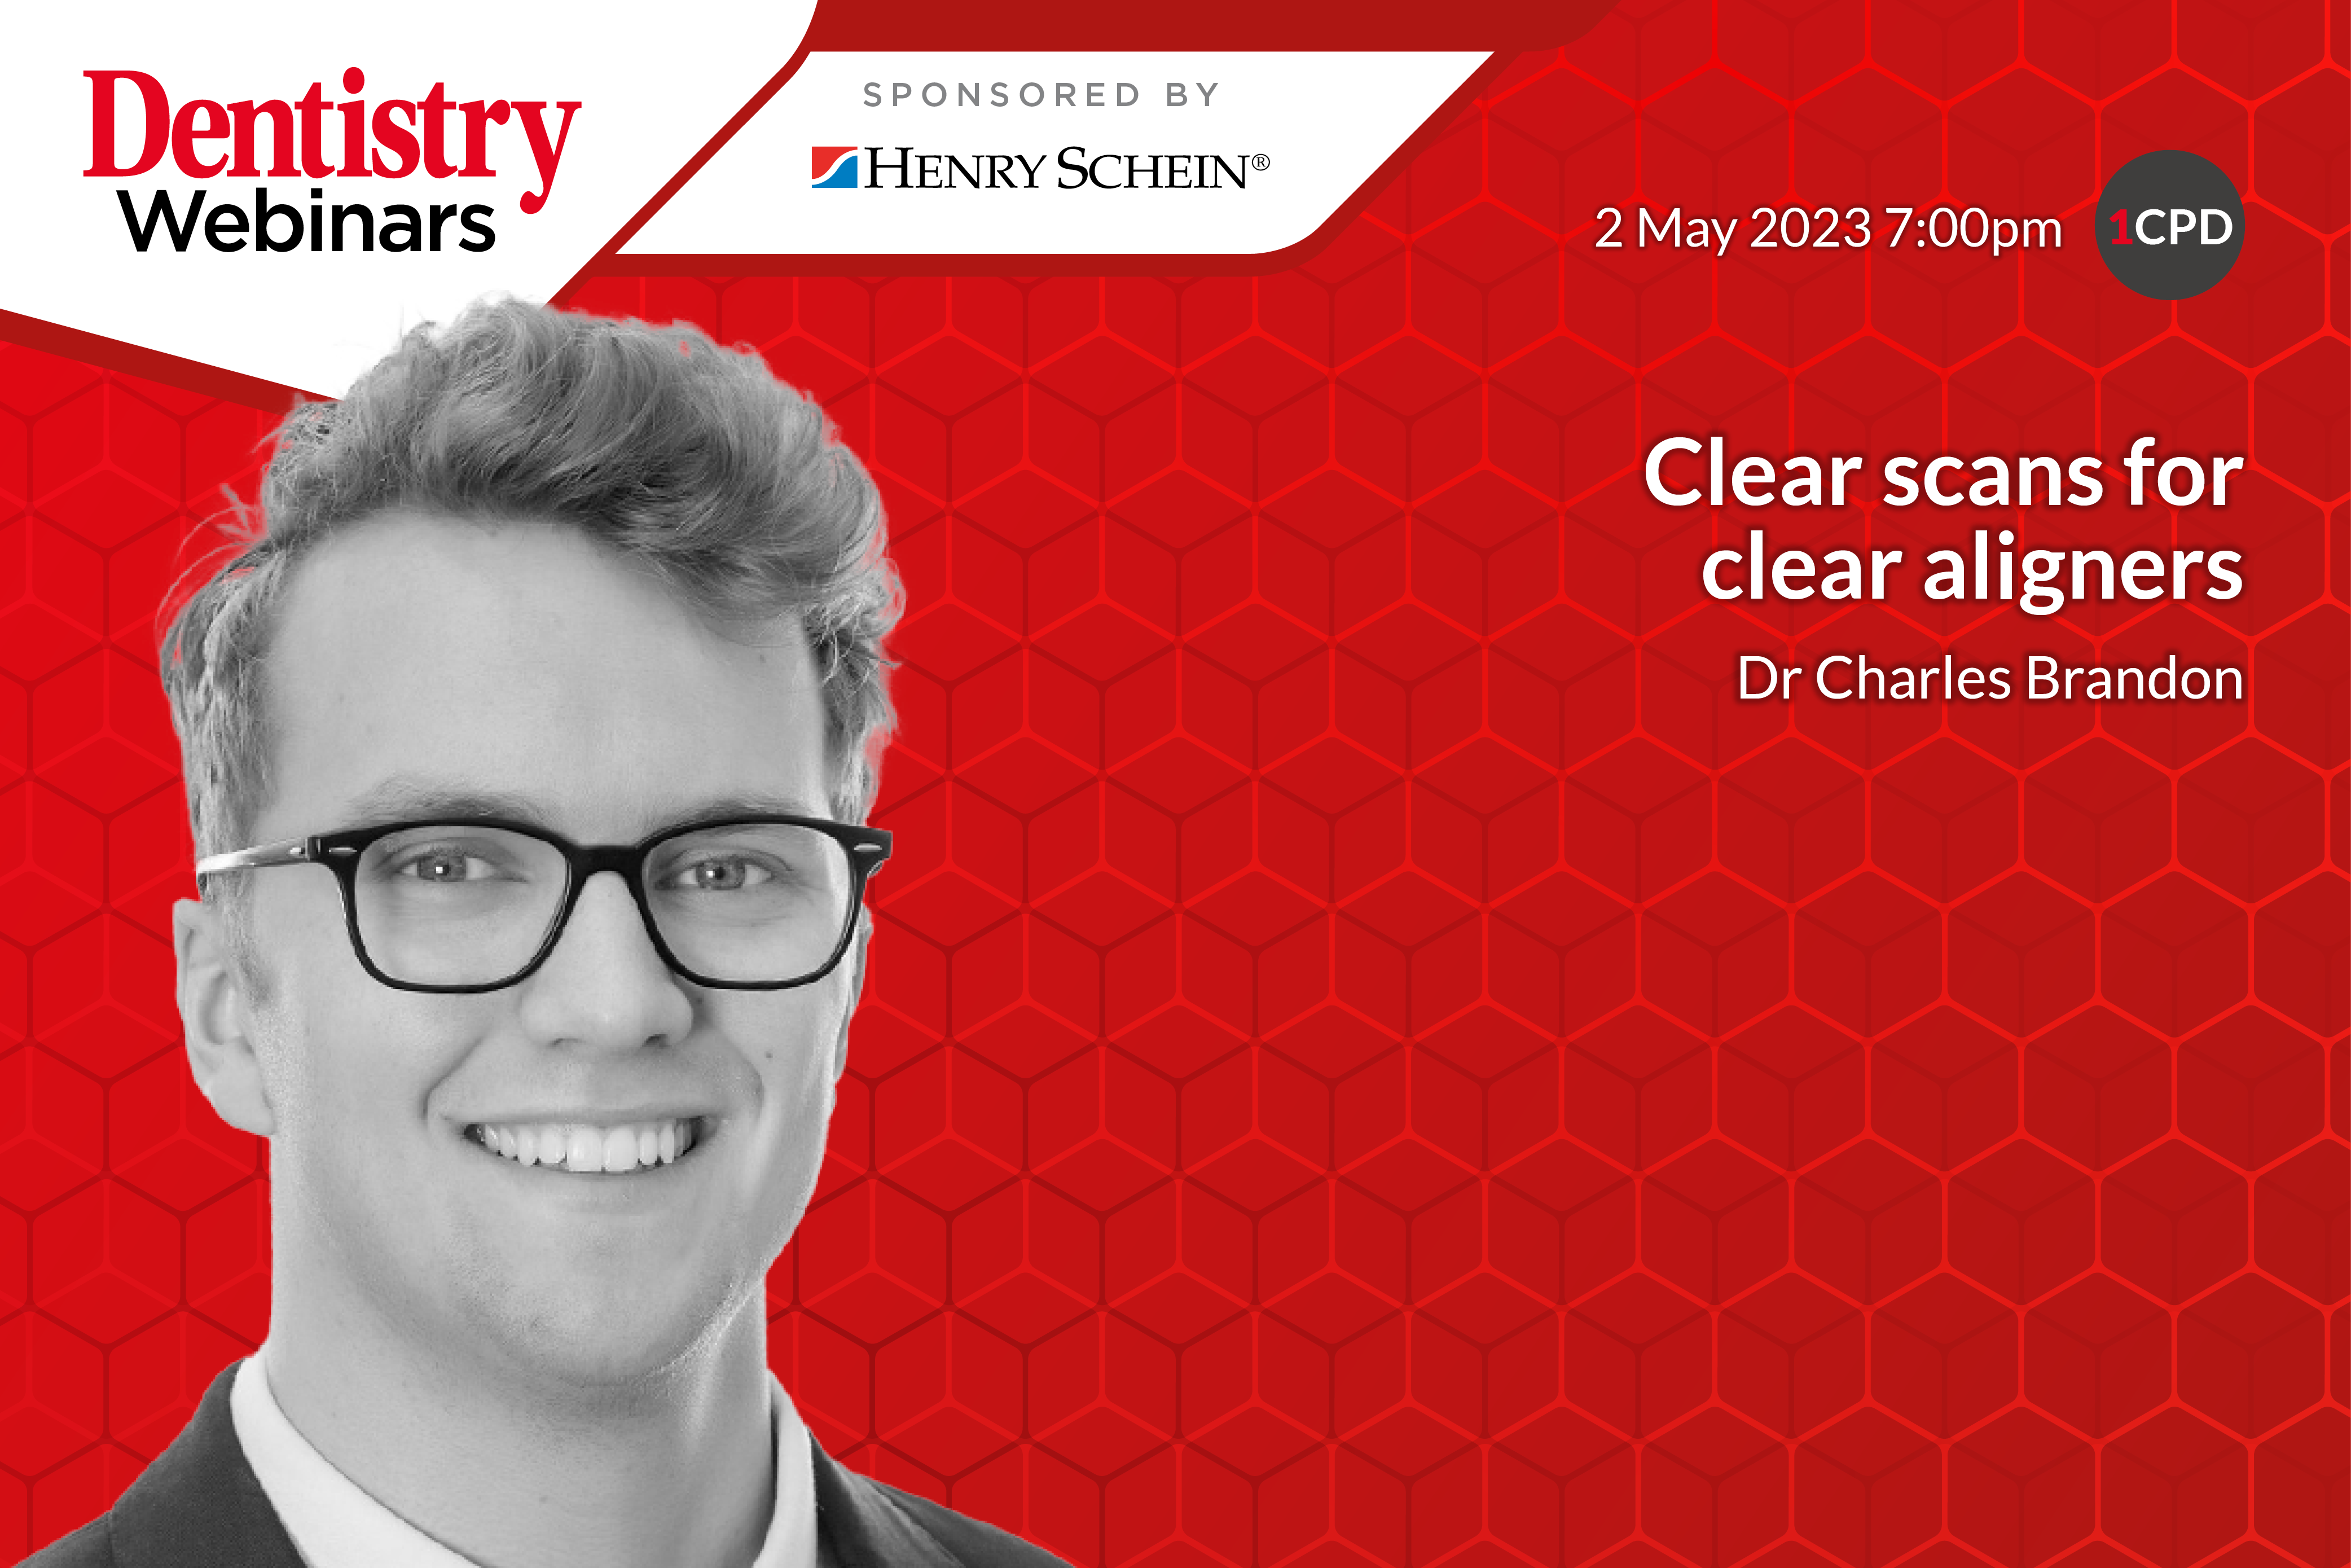 Join Charles Brandon on Tuesday 2 May at 7pm as he discusses clear scans for clear aligners – sign up now!